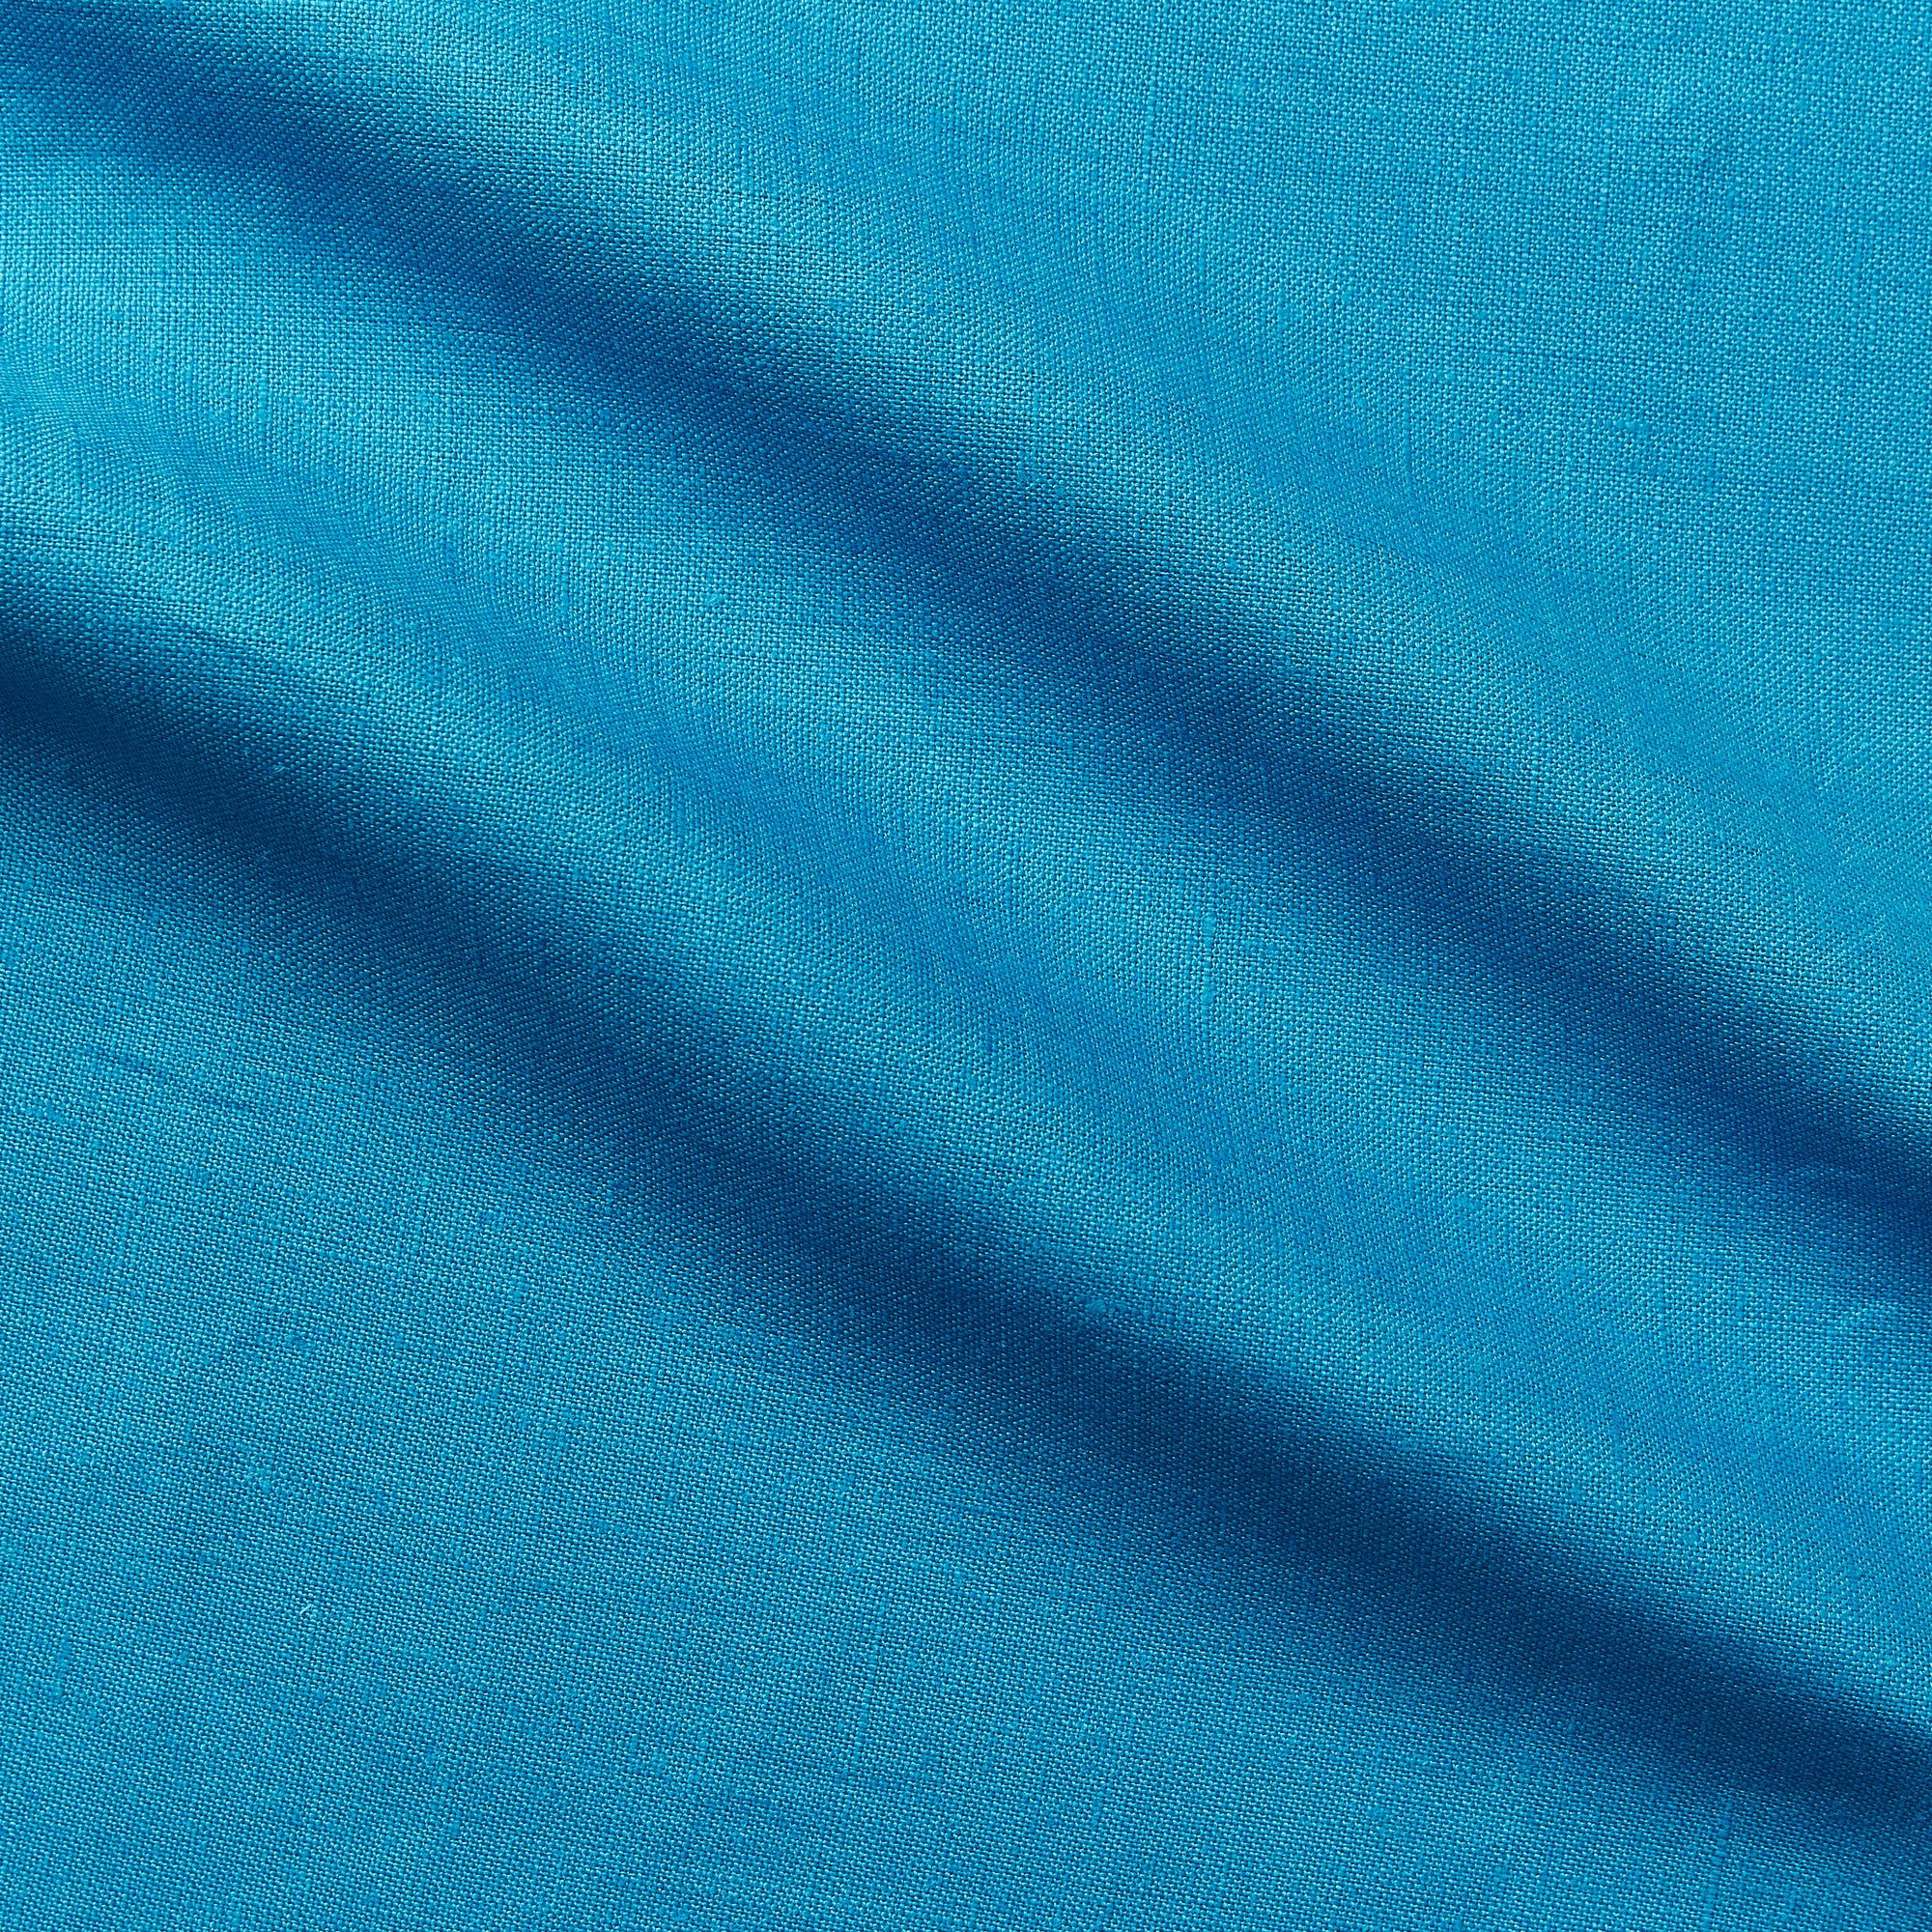 rave on displaying the electric blue color version of a Medium weight breathable pure linen with moderate drape